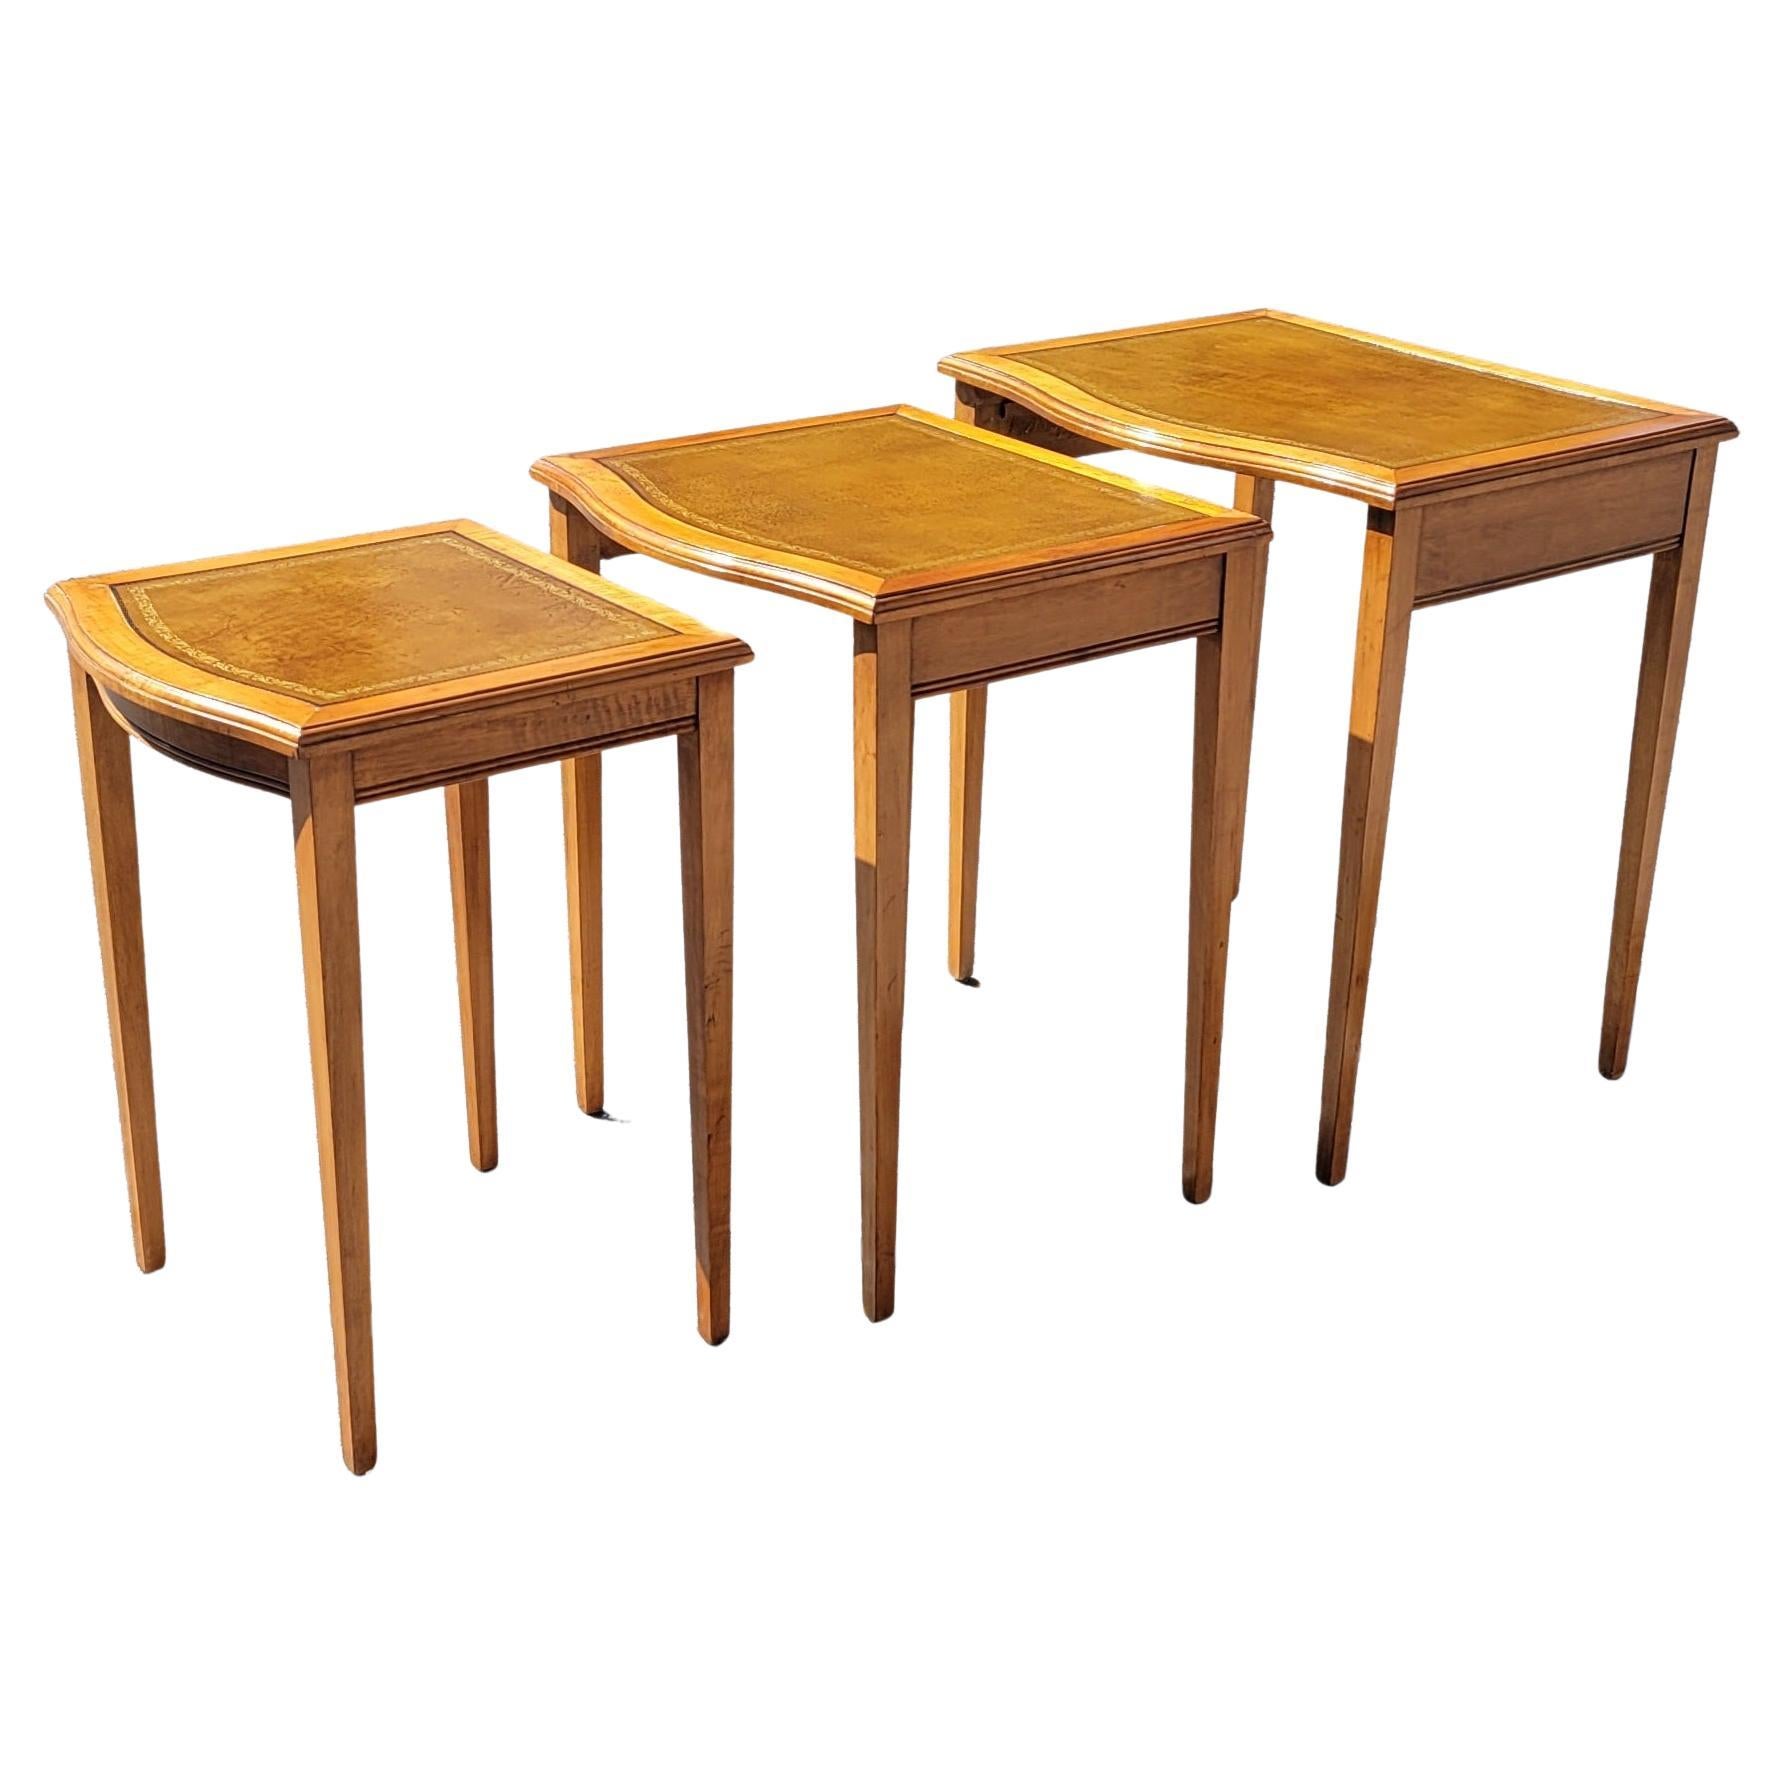 American Mid-Century Modern Fruitwood Stenciled Leather Top Nesting Tables, Set of 3 For Sale